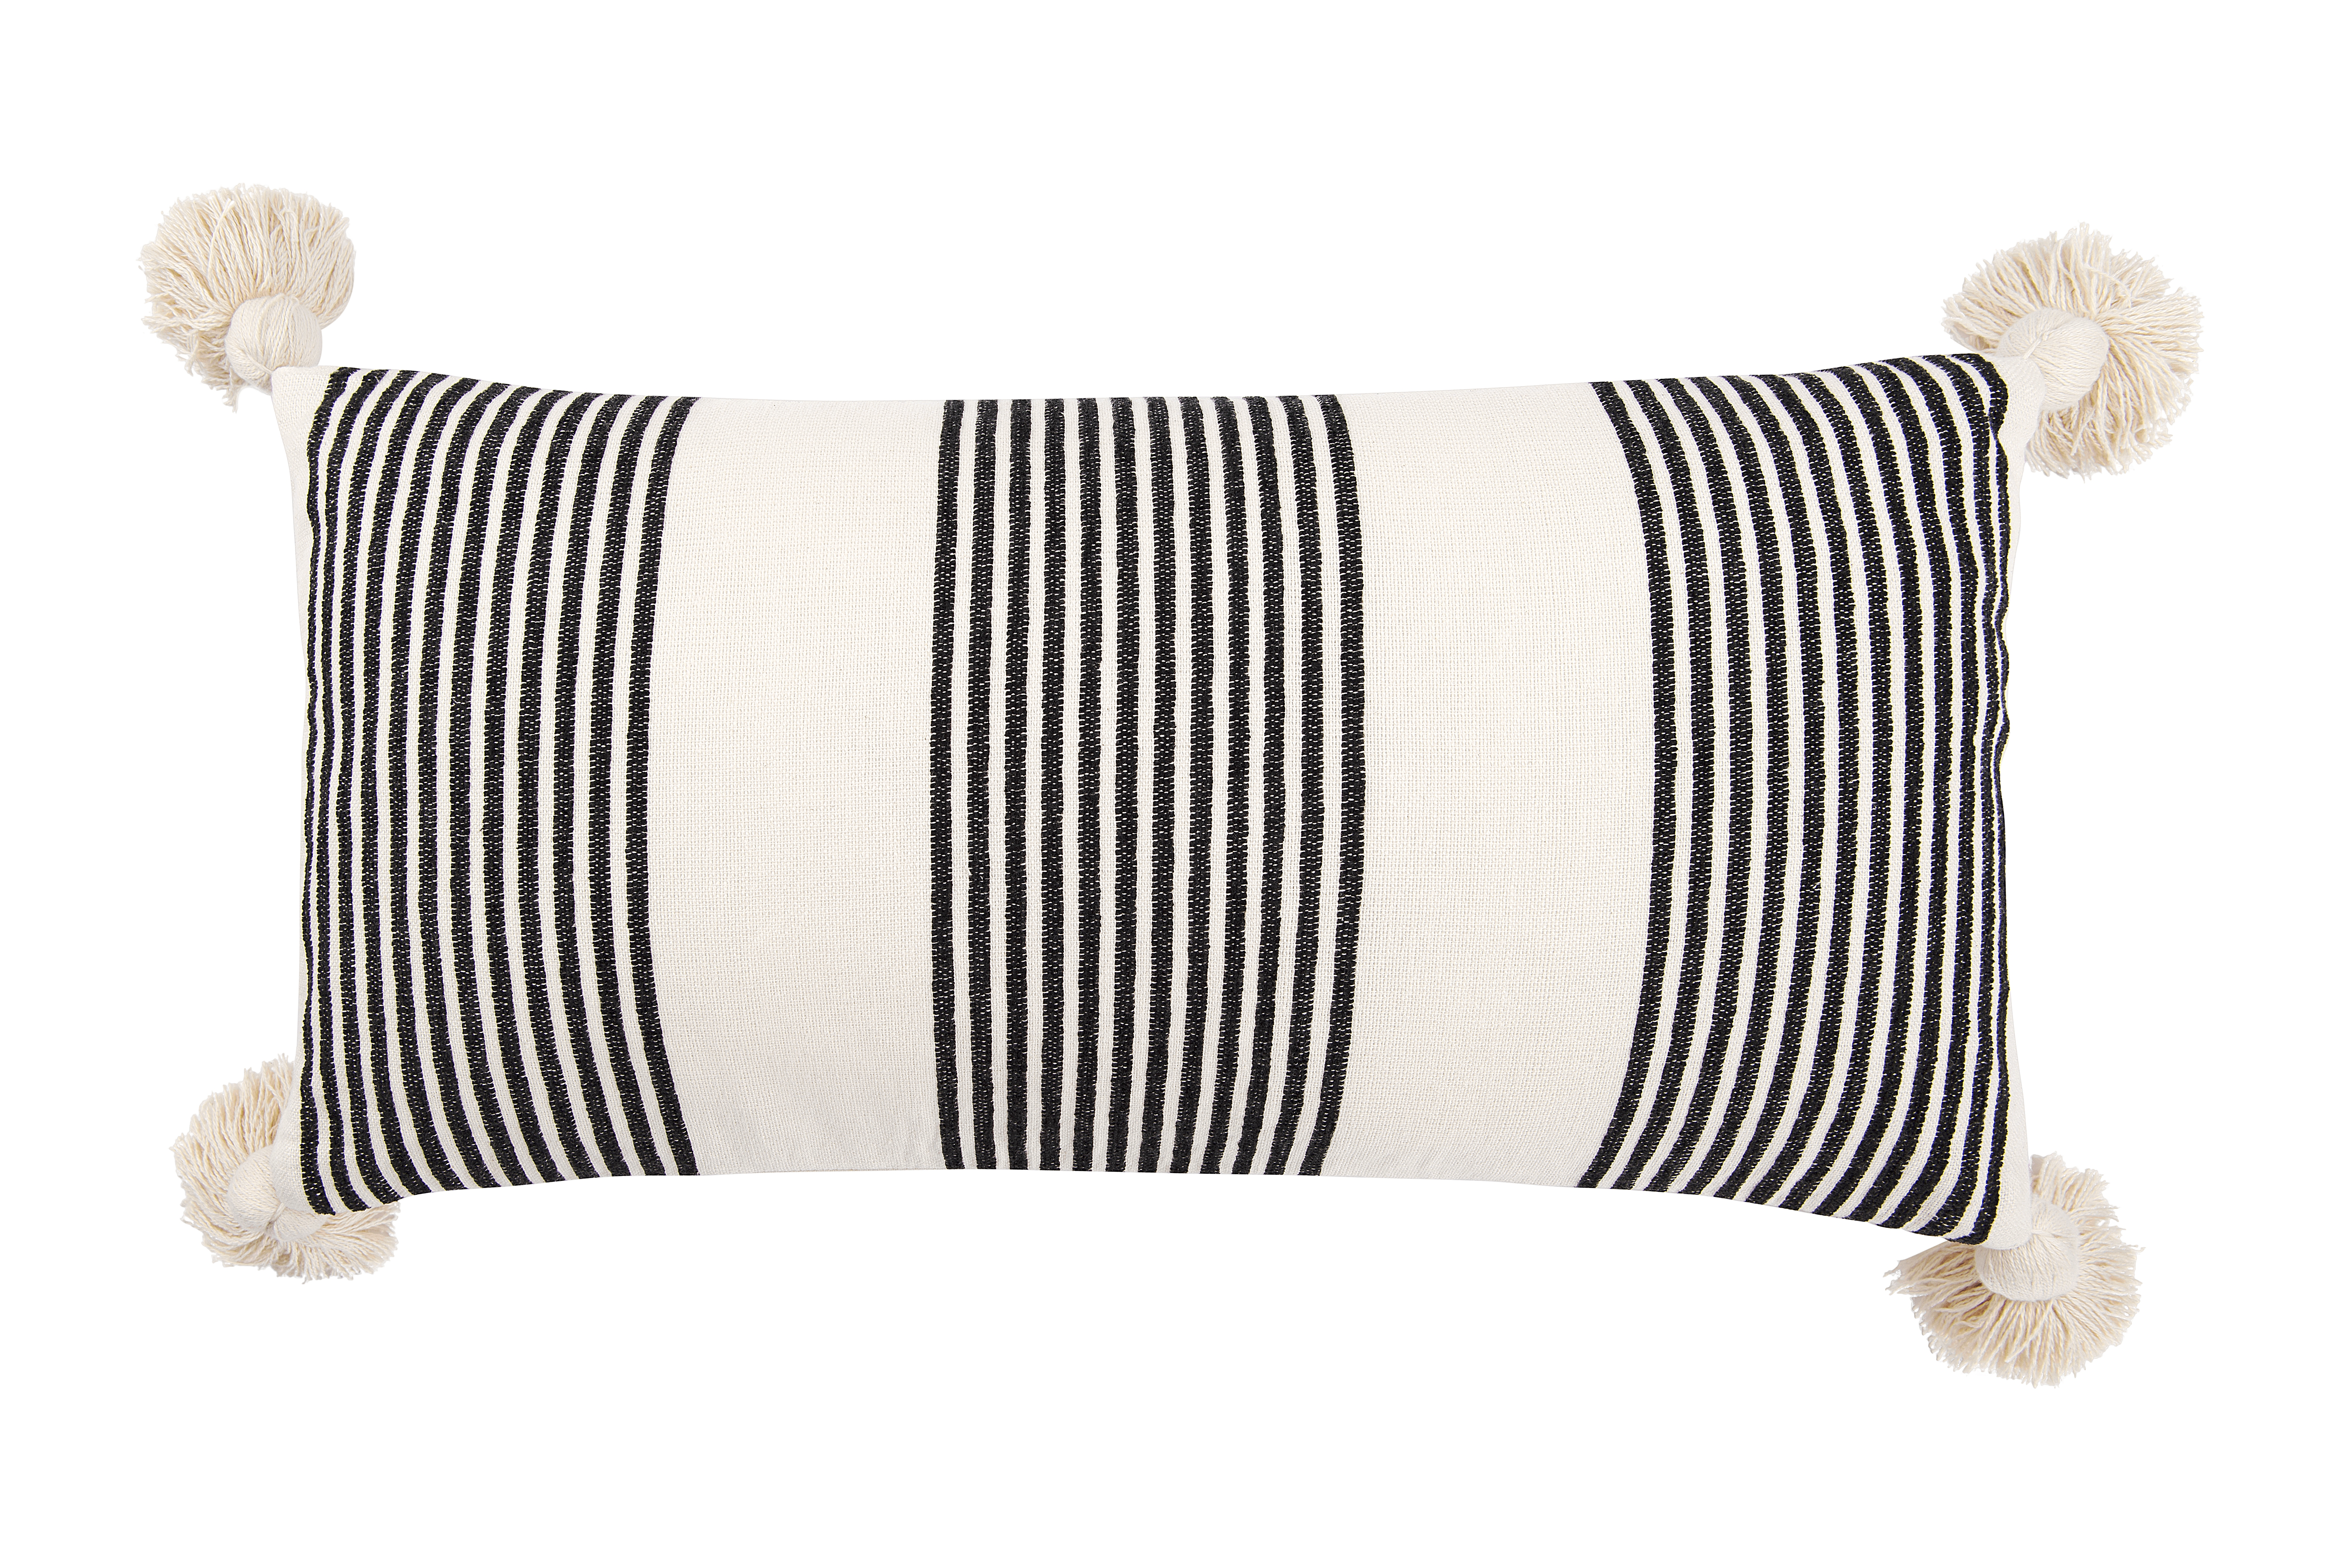 Cream Cotton & Chenille Pillow with Vertical Black Stripes, Tassels & Solid Cream Back - Image 0